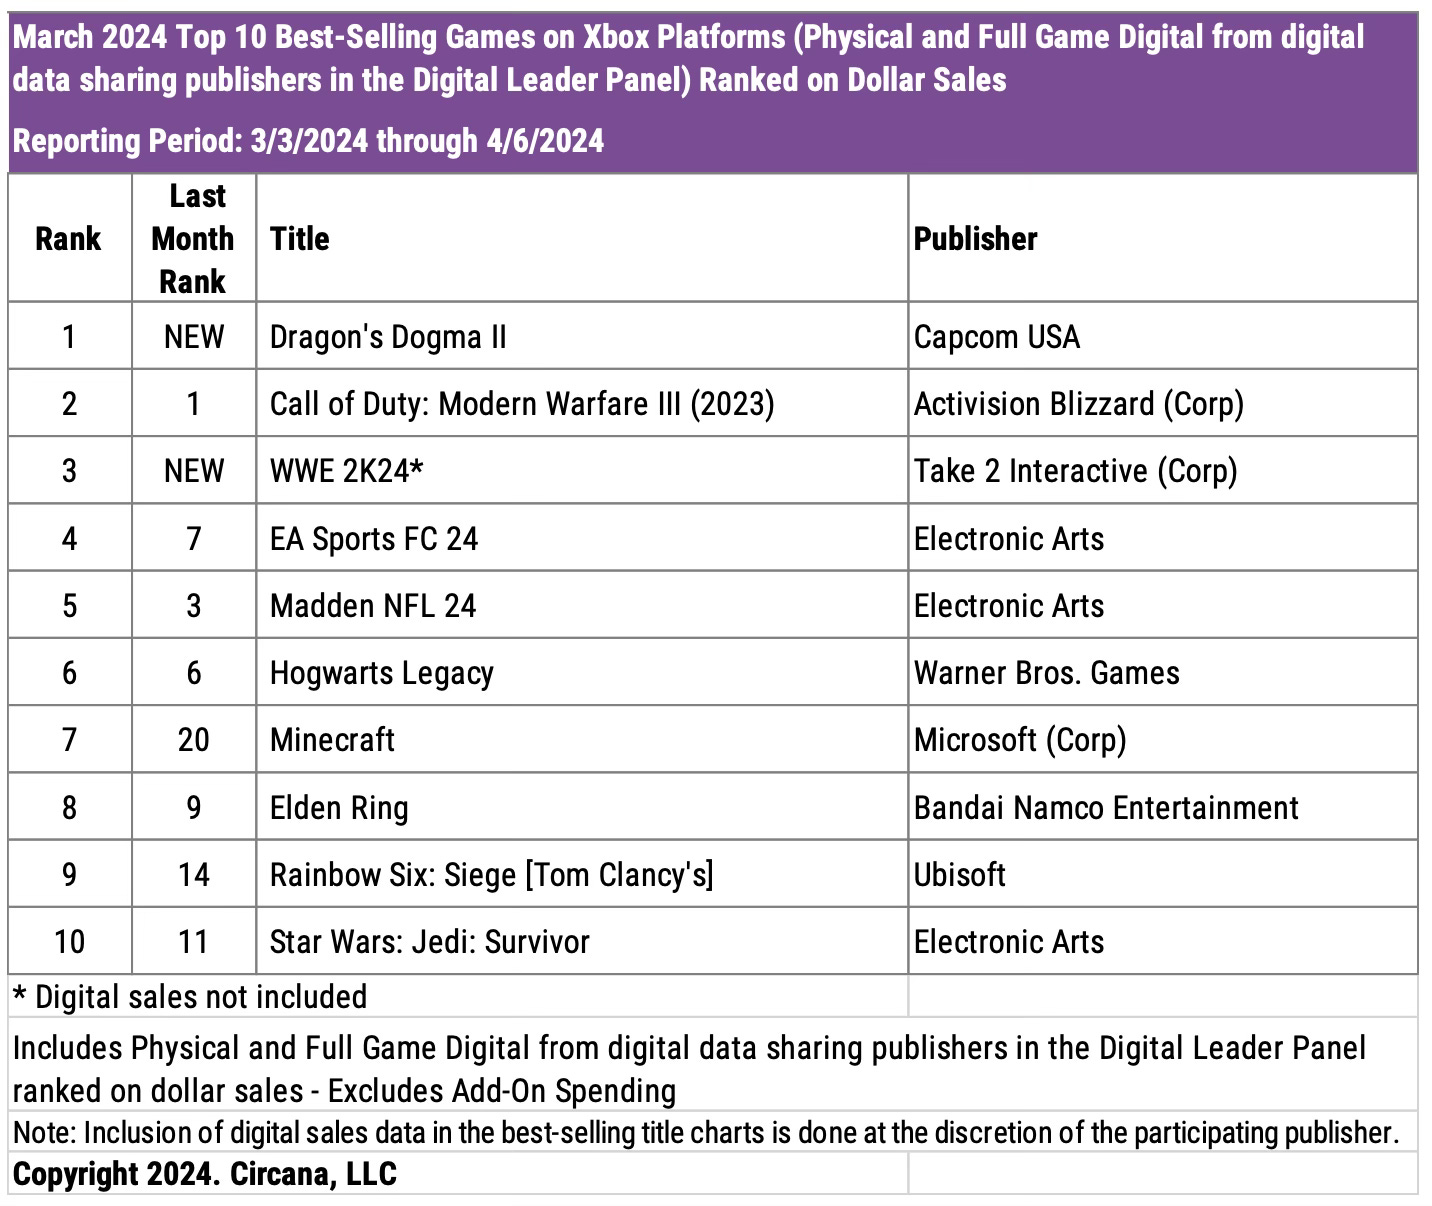 Chart showing the Top 10 Best-Selling Games on Xbox Platforms in March 2024